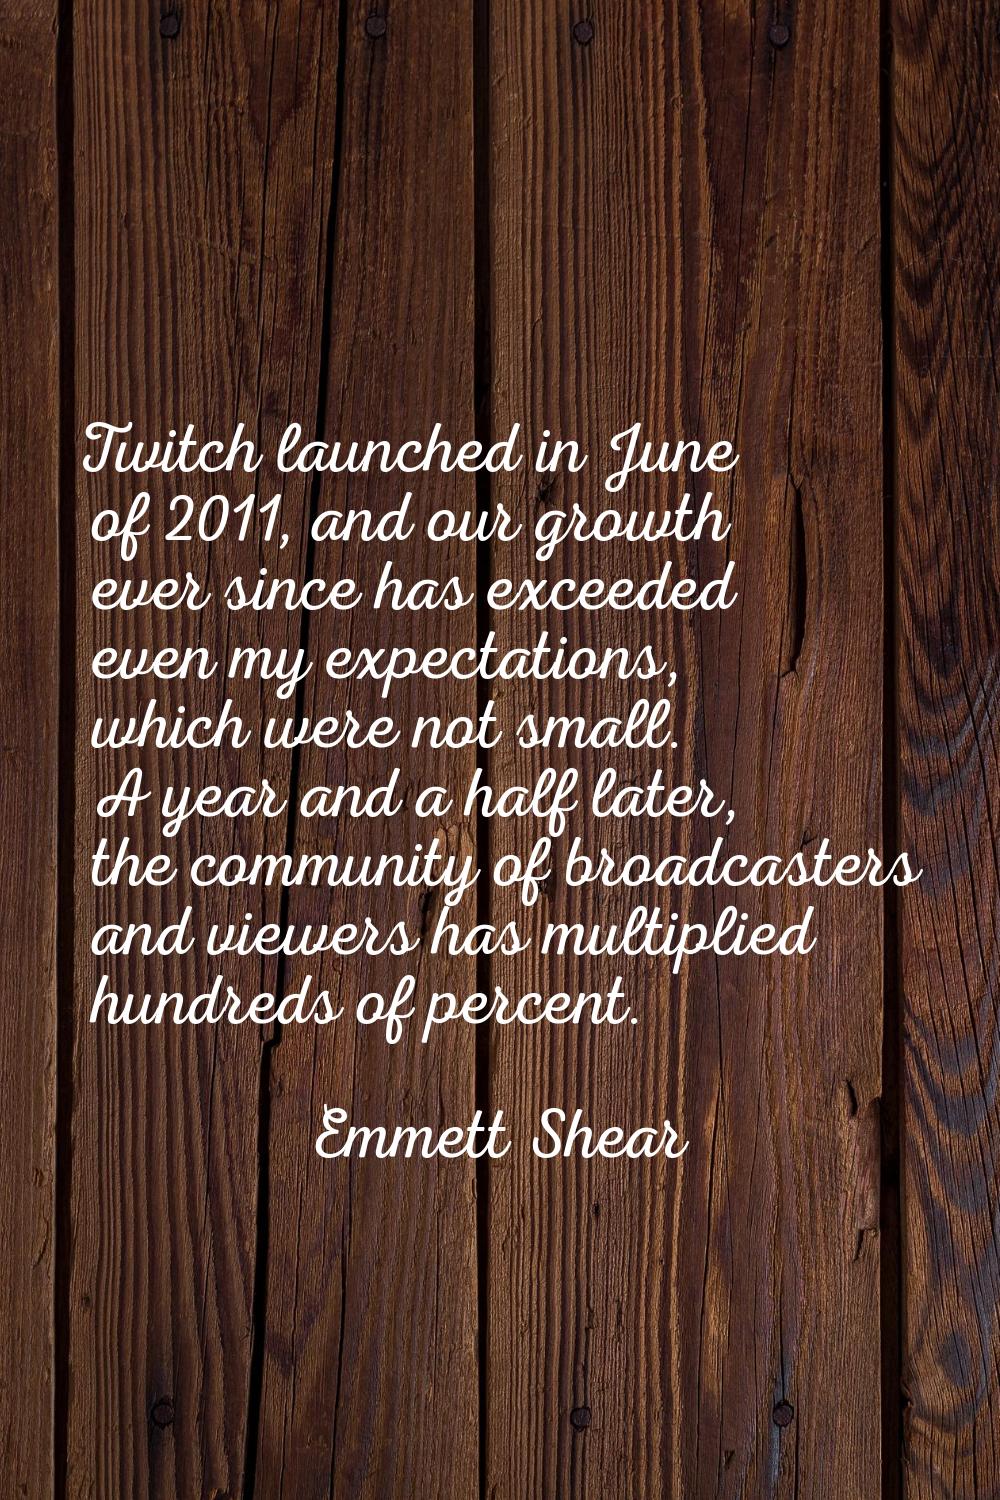 Twitch launched in June of 2011, and our growth ever since has exceeded even my expectations, which